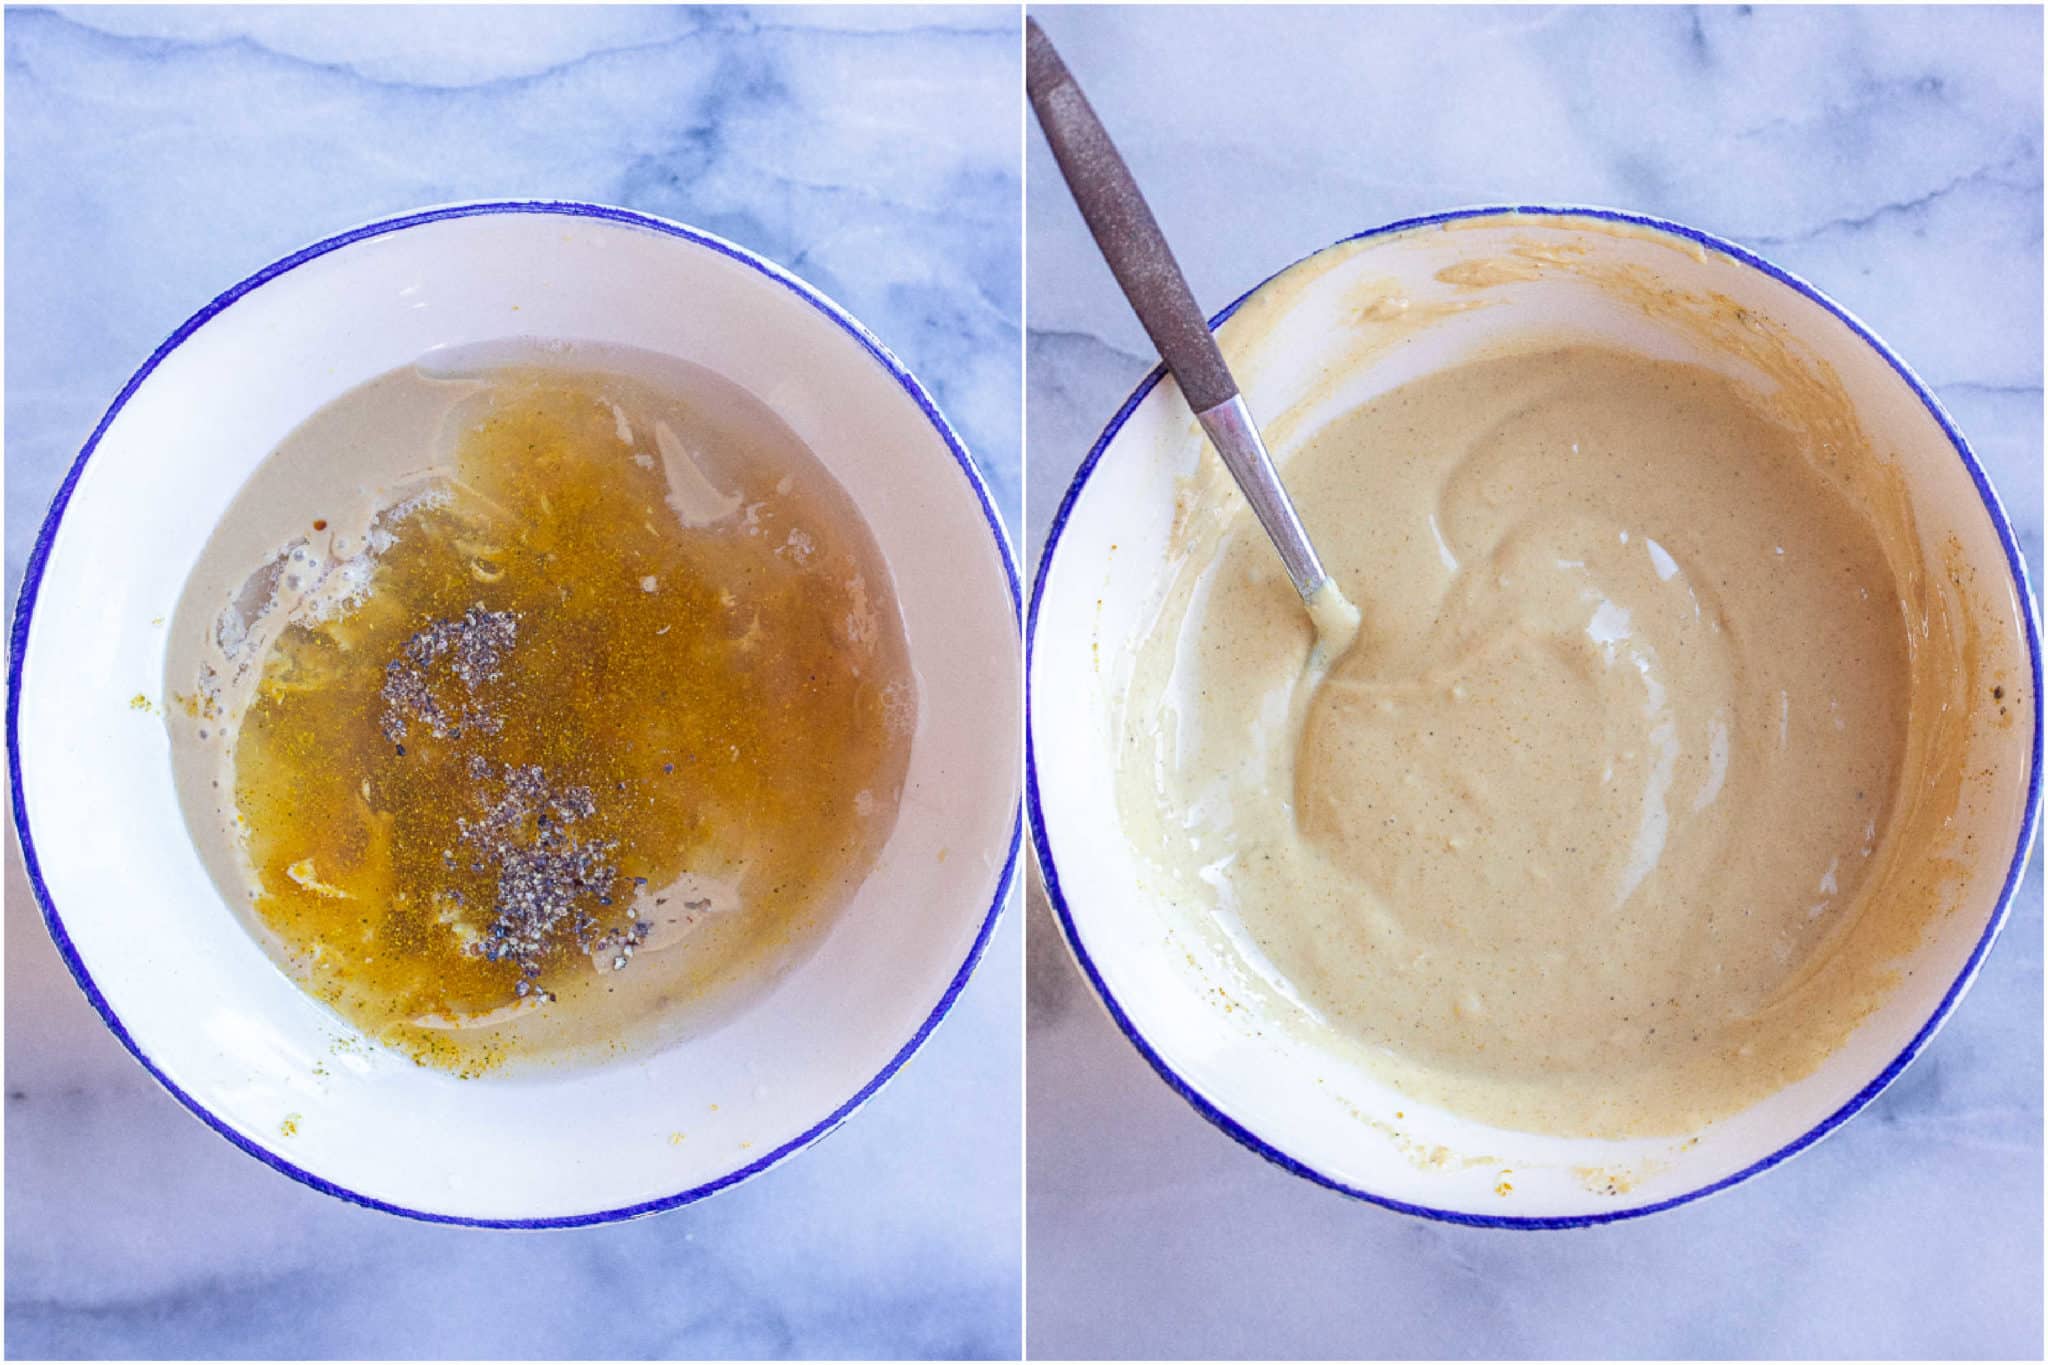 showing the curry tahini sauce before and after it has been mixed up